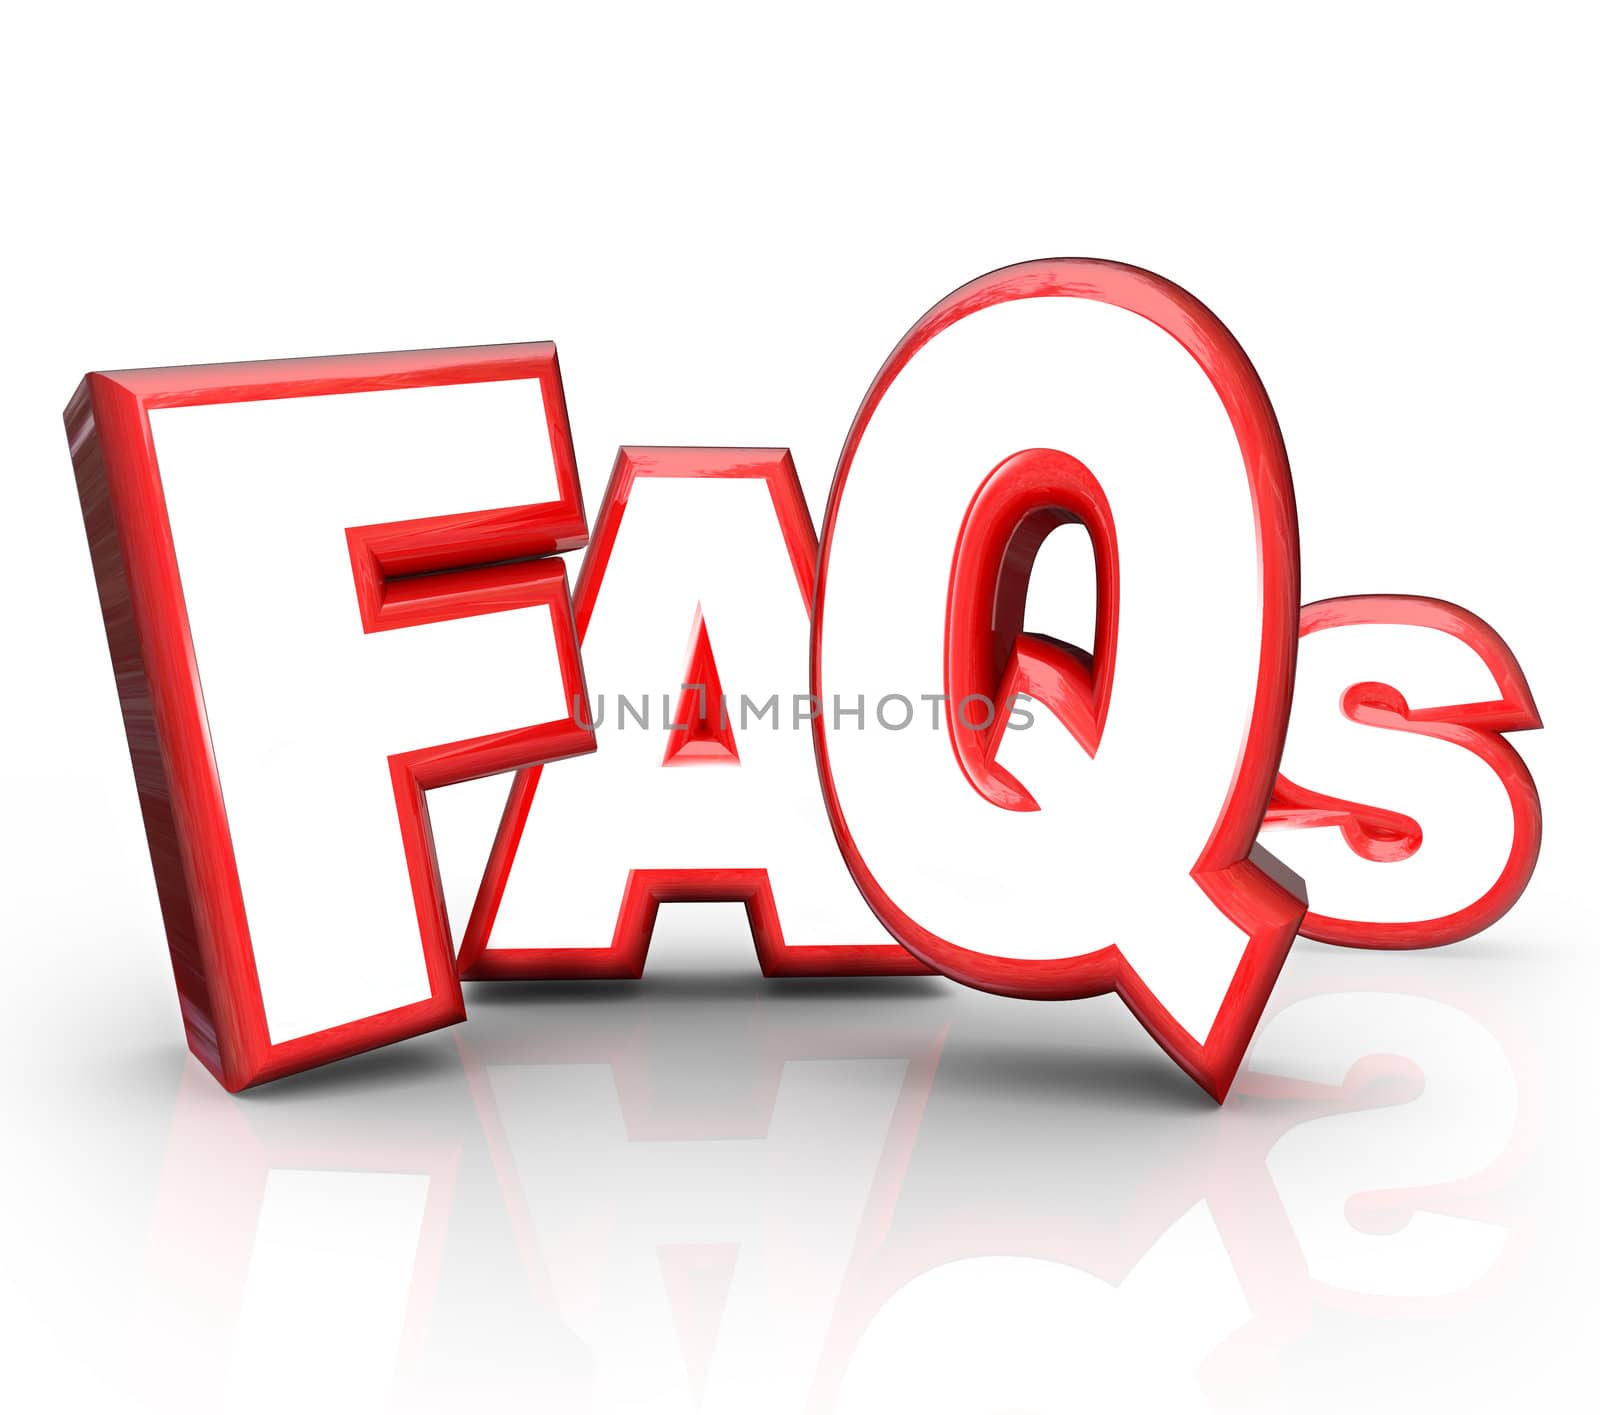 The letters FAQs standing for Frequently Asked Questions in 3D lettering representing question and answer period or forum to get you the solution and help you need for a problem or confusion